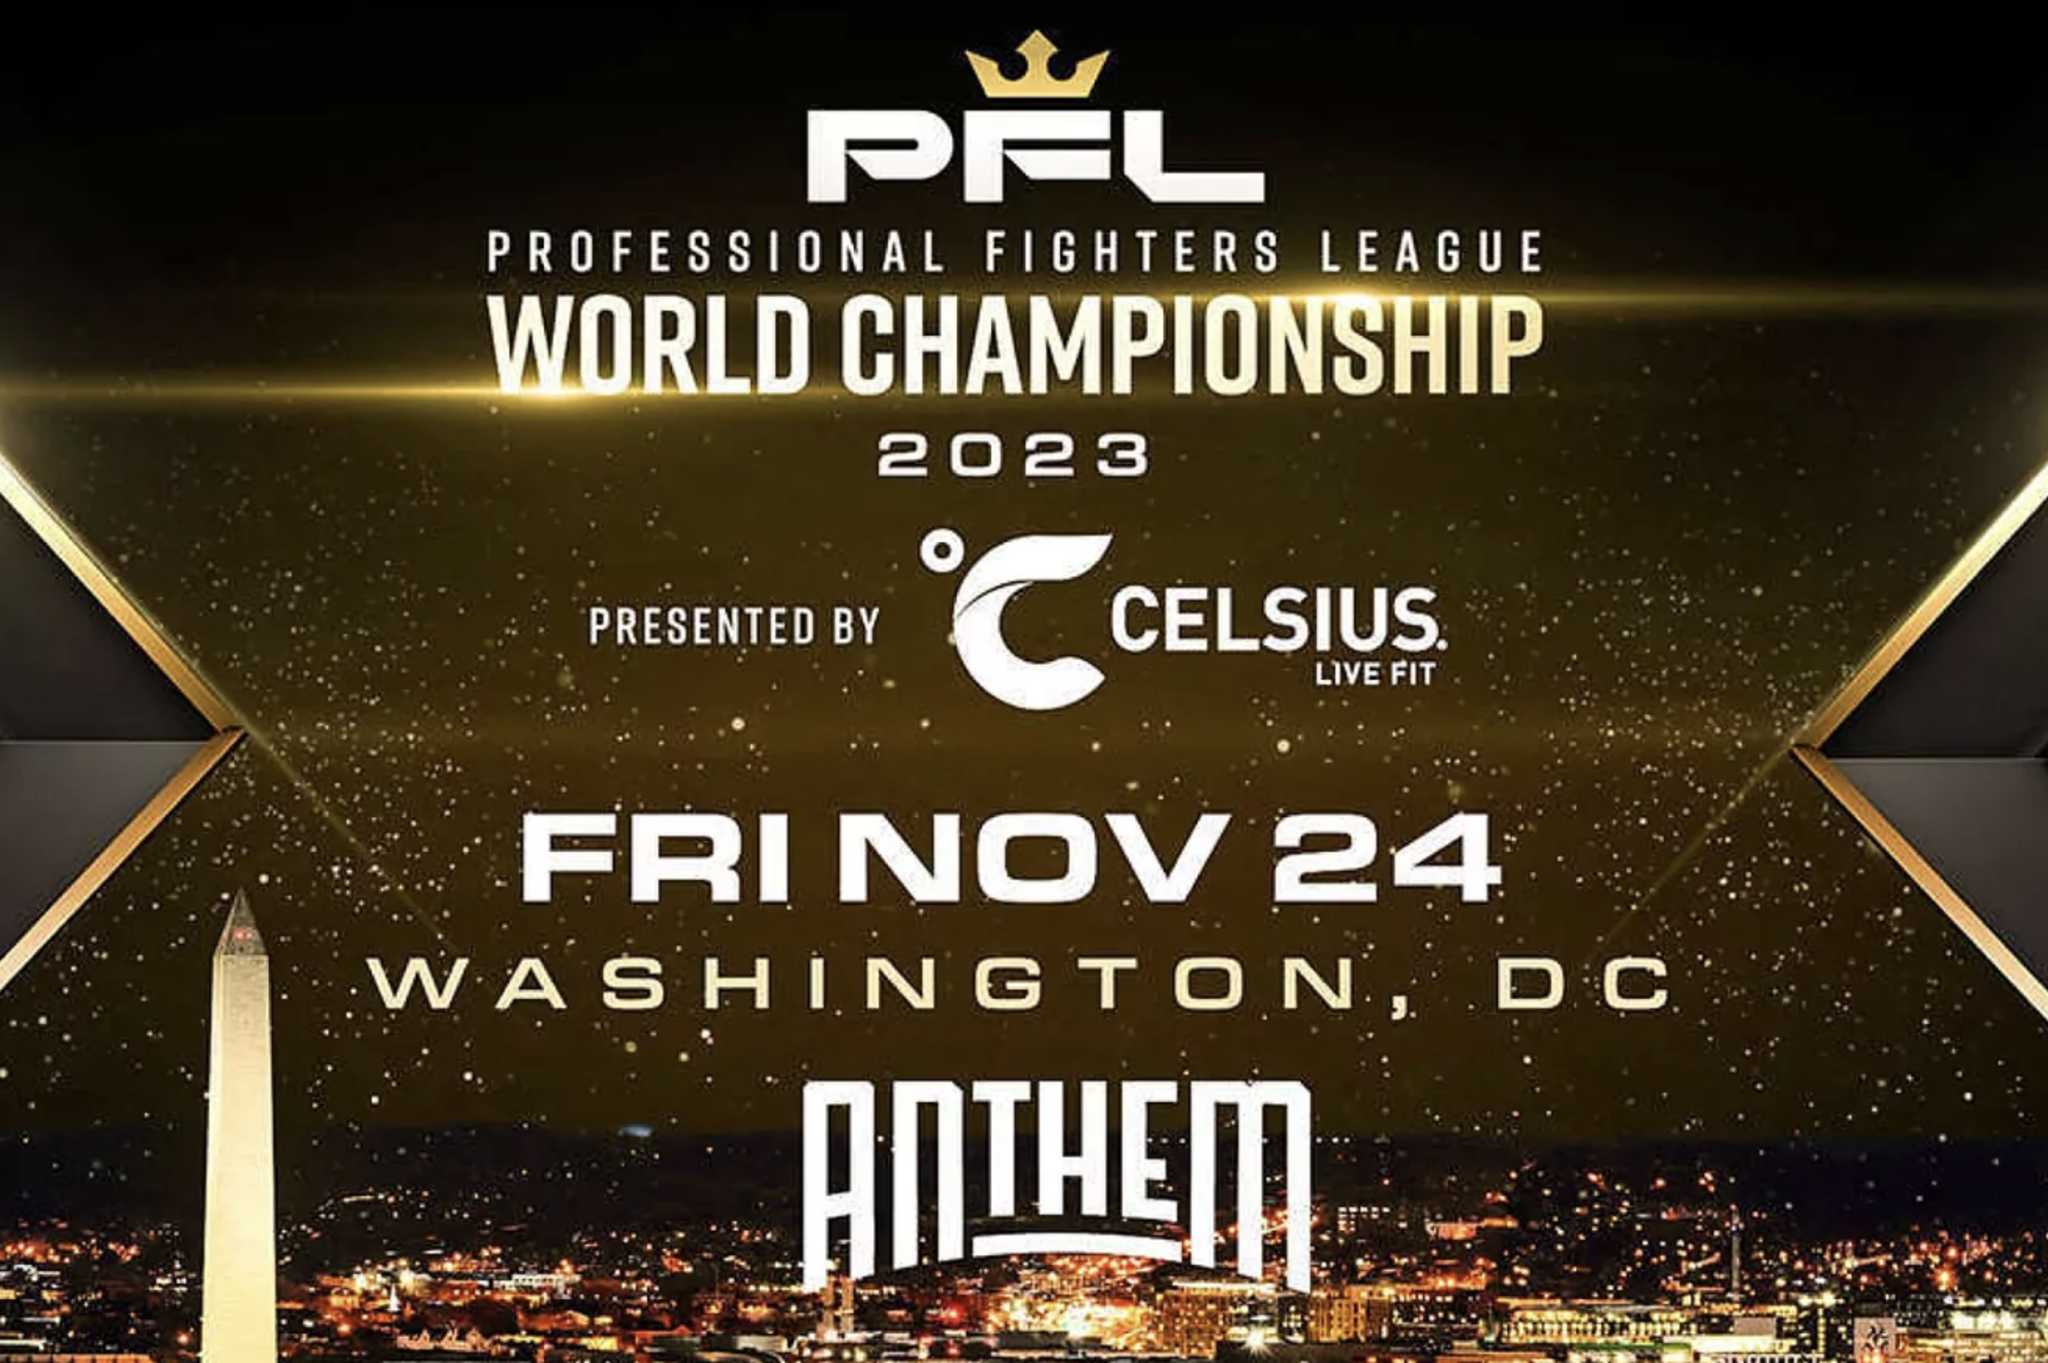 PFL World Championship Tickets: How much do they cost and how many are still available?